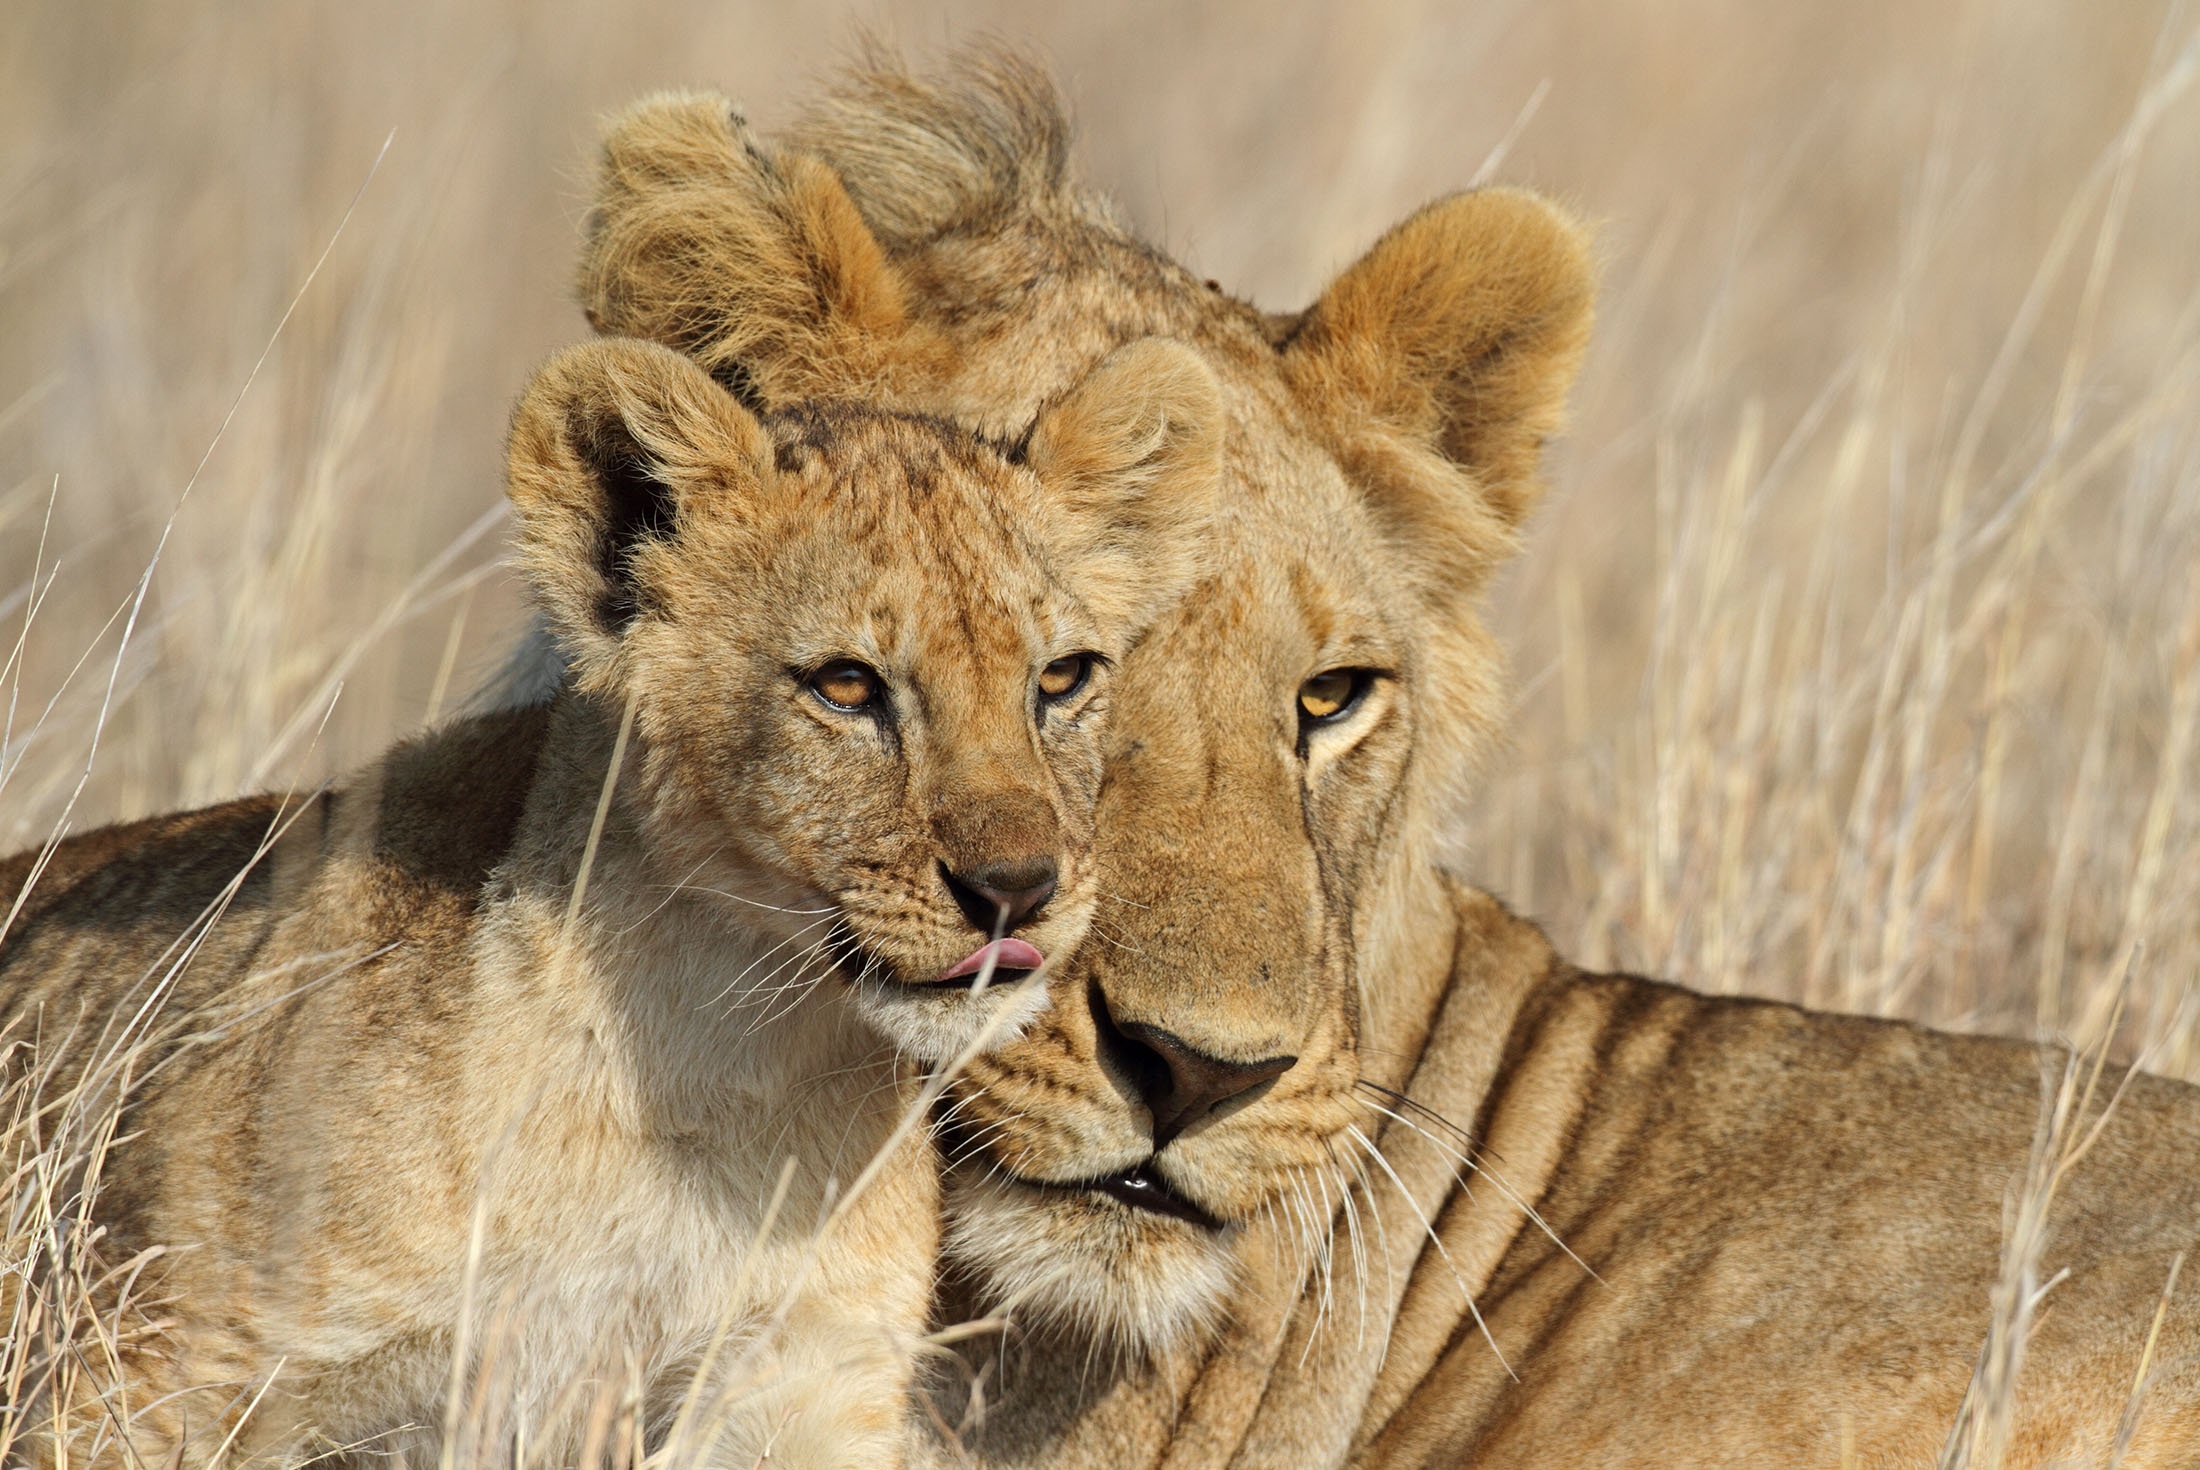 Lioness and her cub in Serengeti National Park